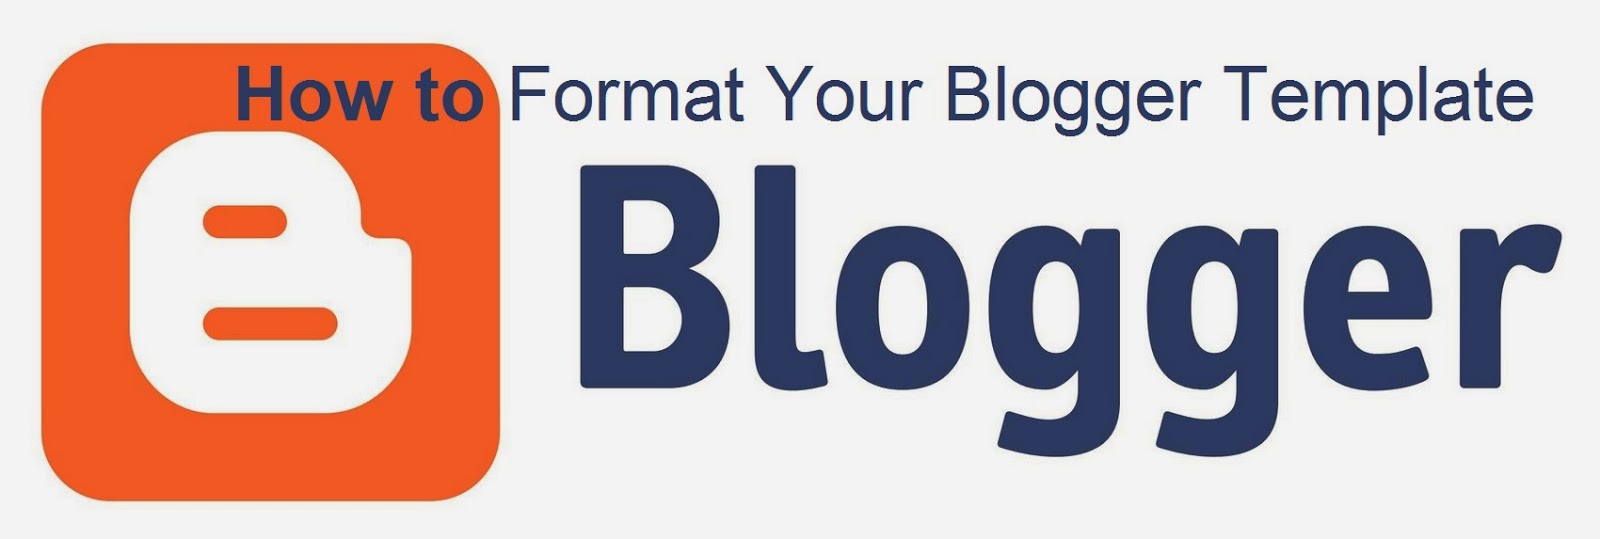 How to Format Your Blogger Template : eAskme